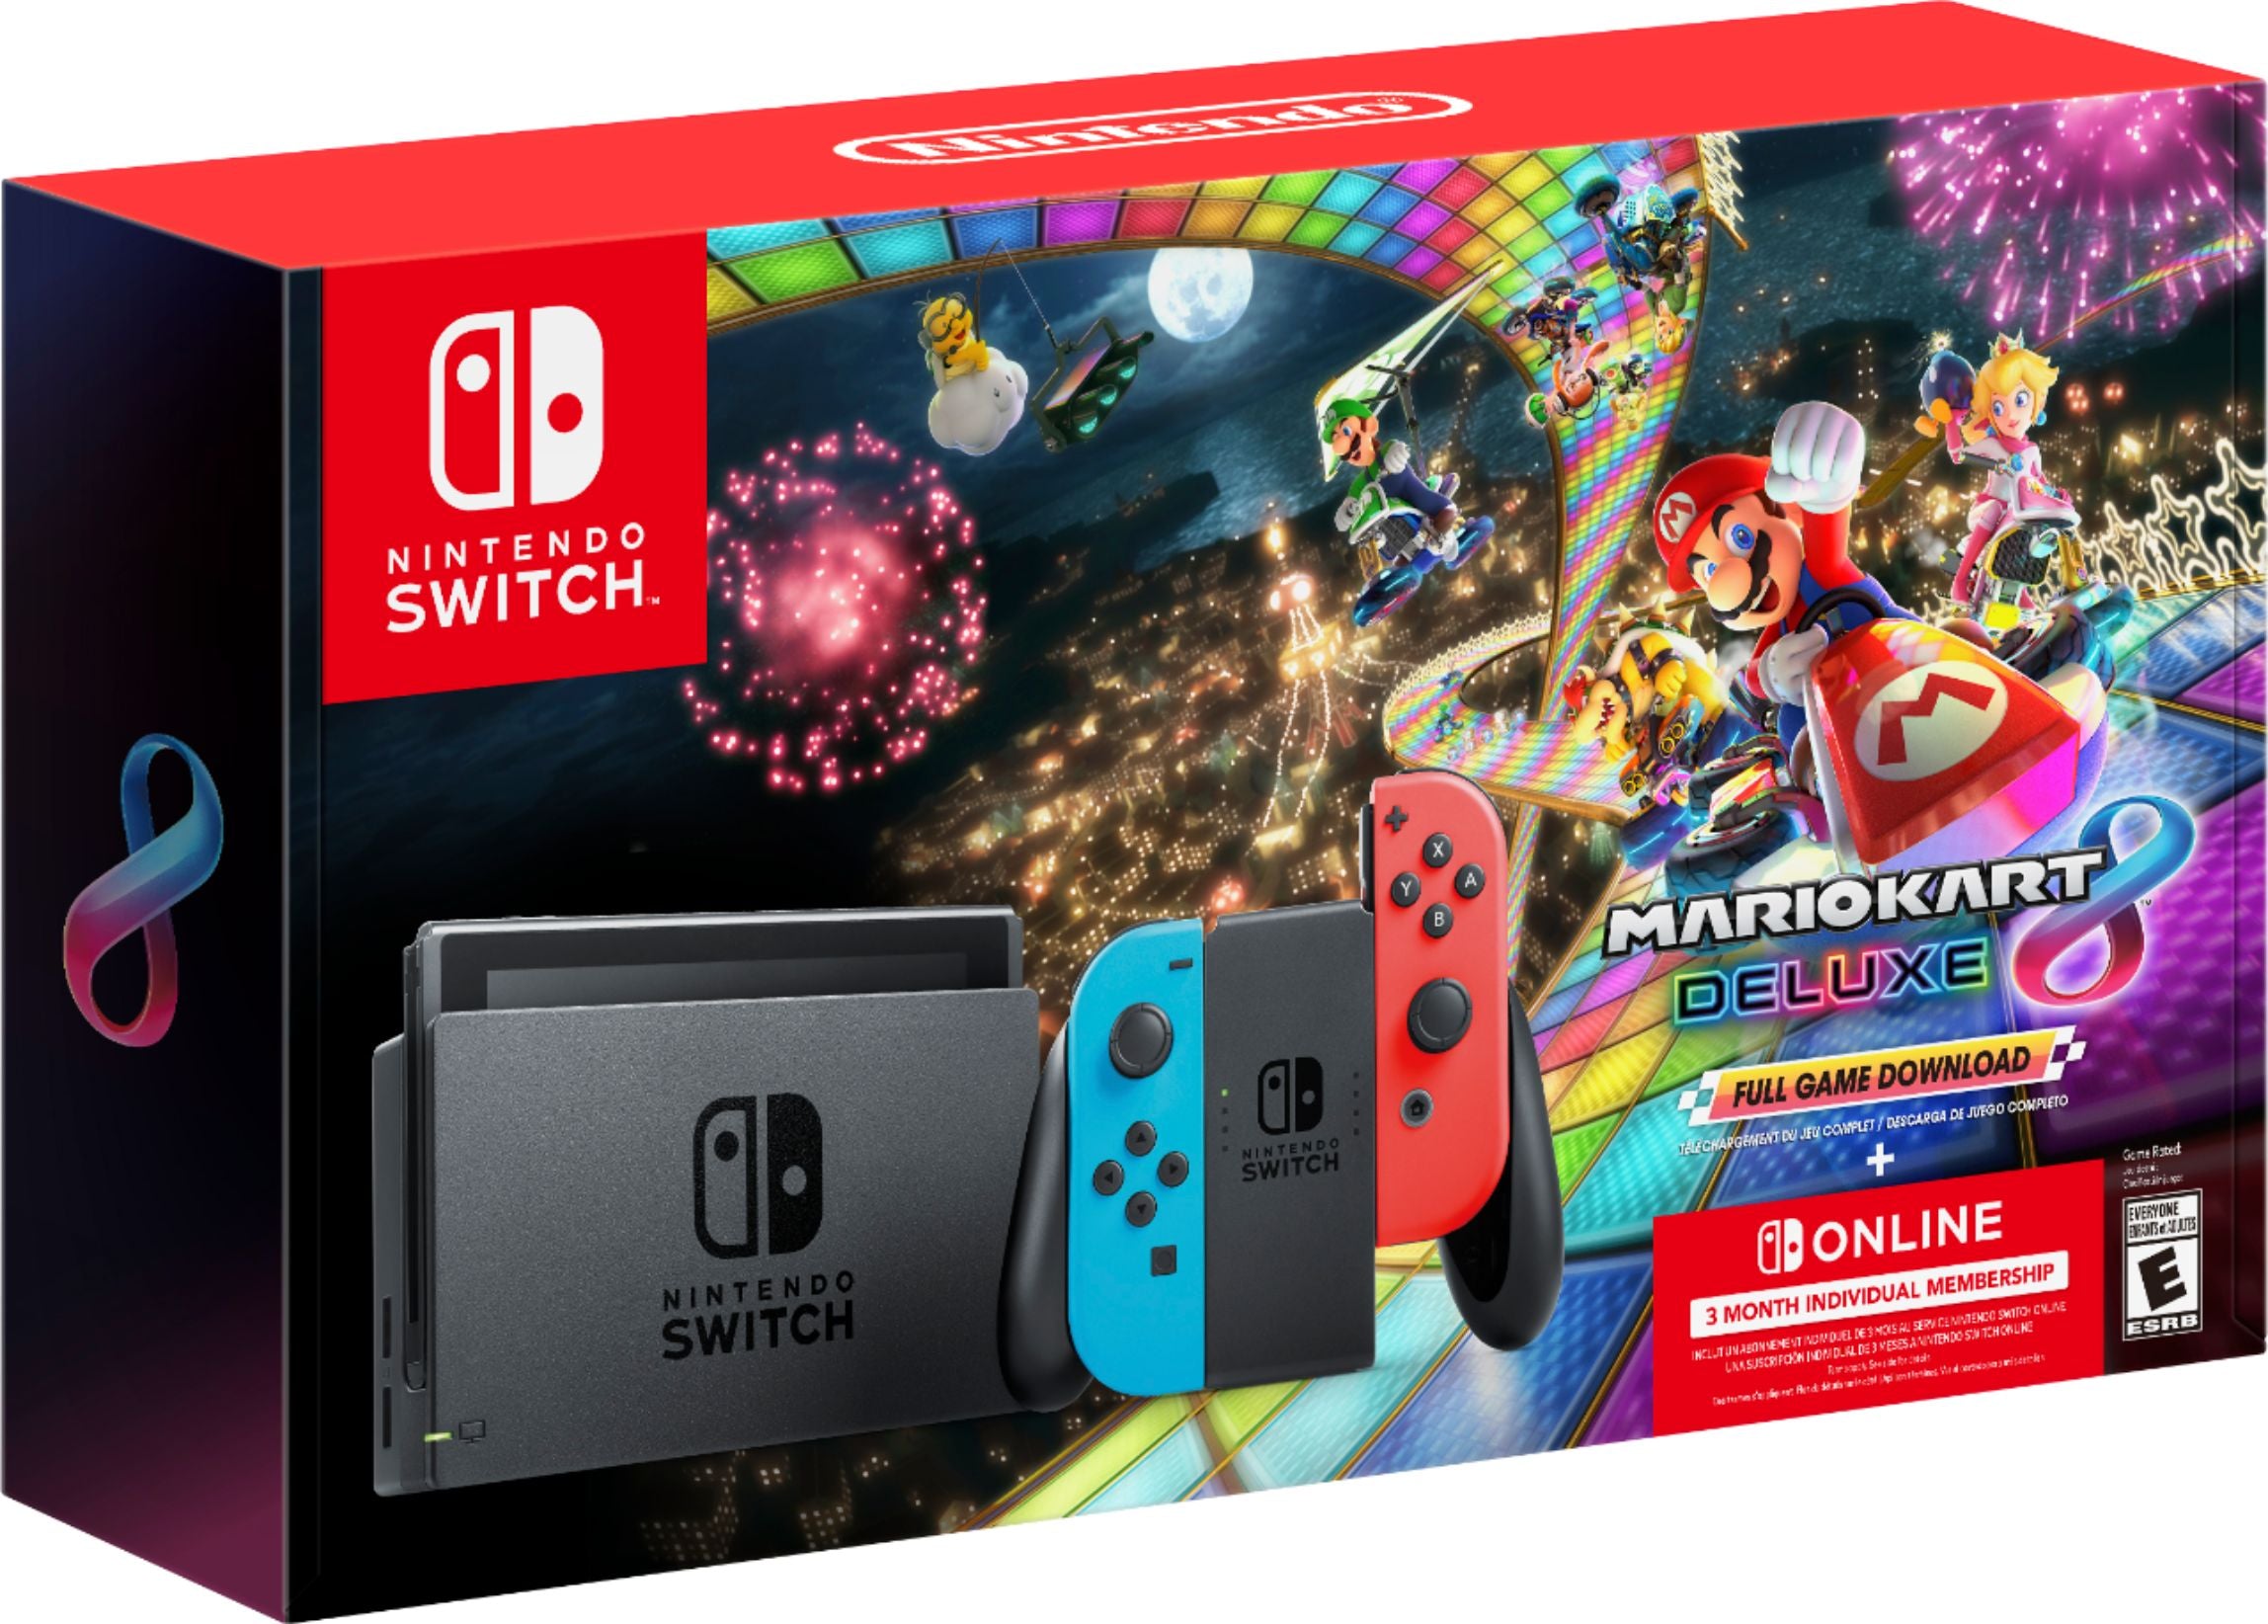 Nintendo Switch Mario Kart 8 Neon Deluxe Racing Bundle: Red Blue Joy Con Console, Mario Kart 8 Deluxe & Online Membership, Travel Case, Additional Red/Blue JoyCons, 4 Pcs Mytrix Wheels & Grips